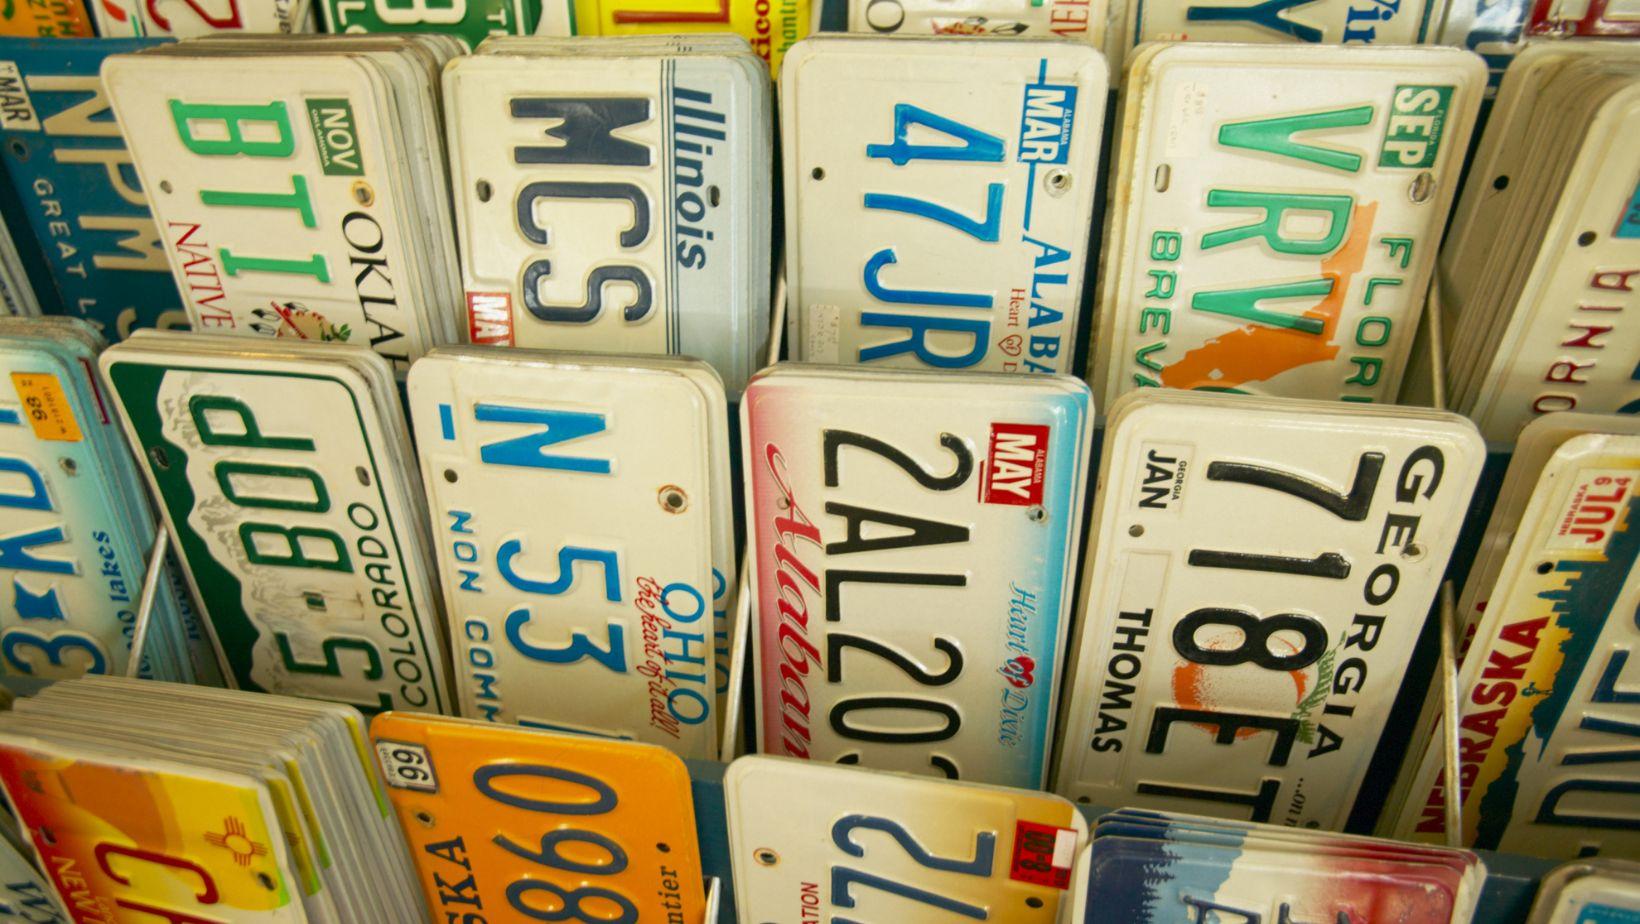 Rows of license plates from different states.